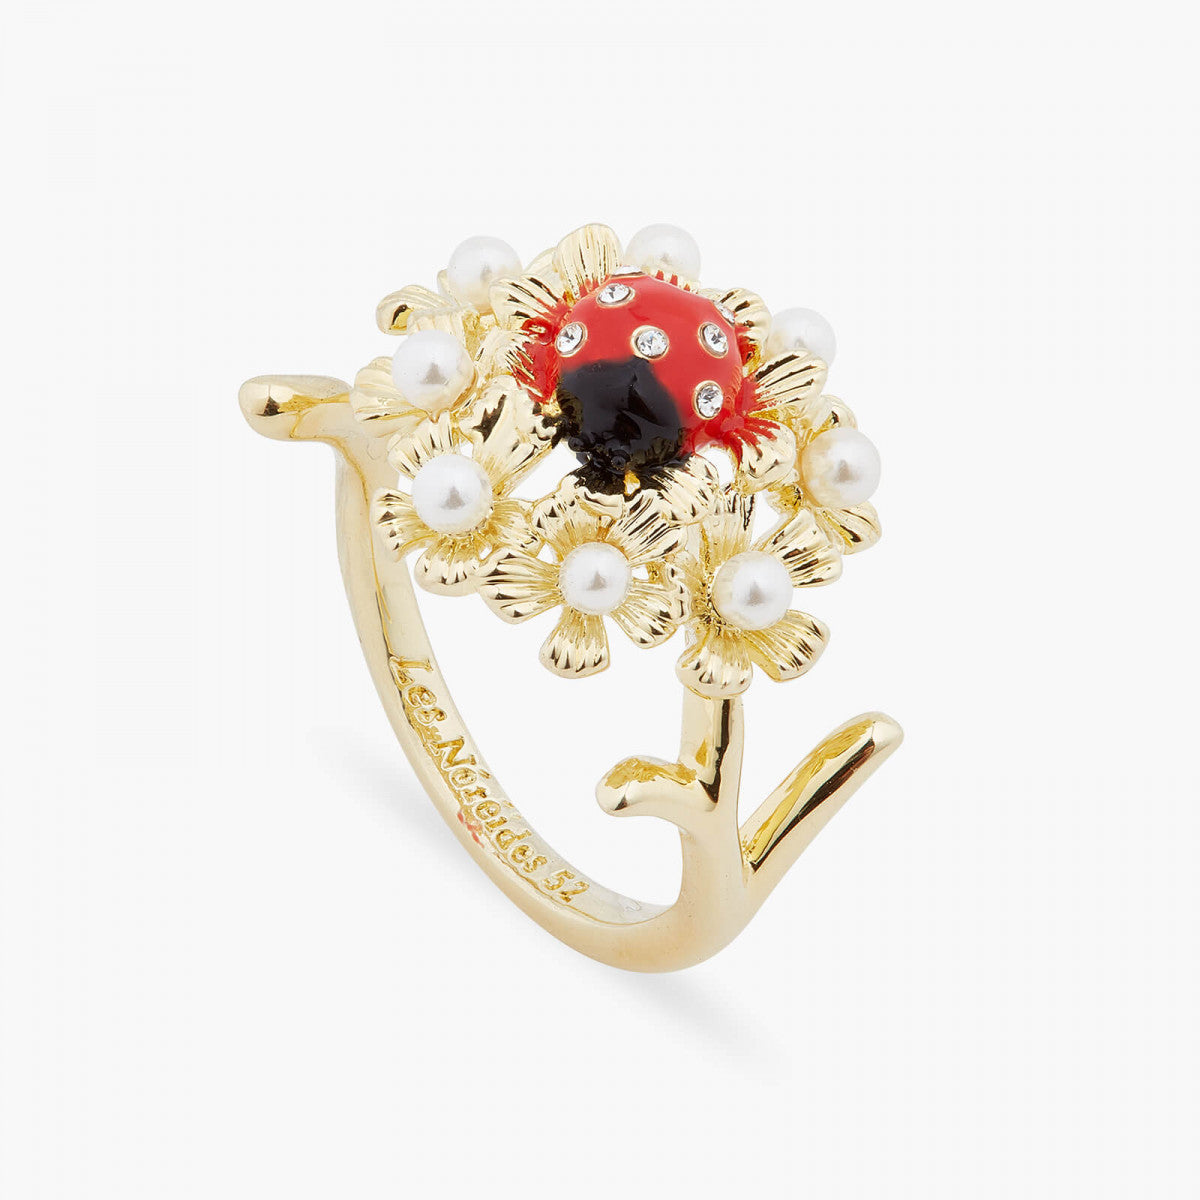 LADYBIRD AND WOOD ANEMONE COCKTAIL RING